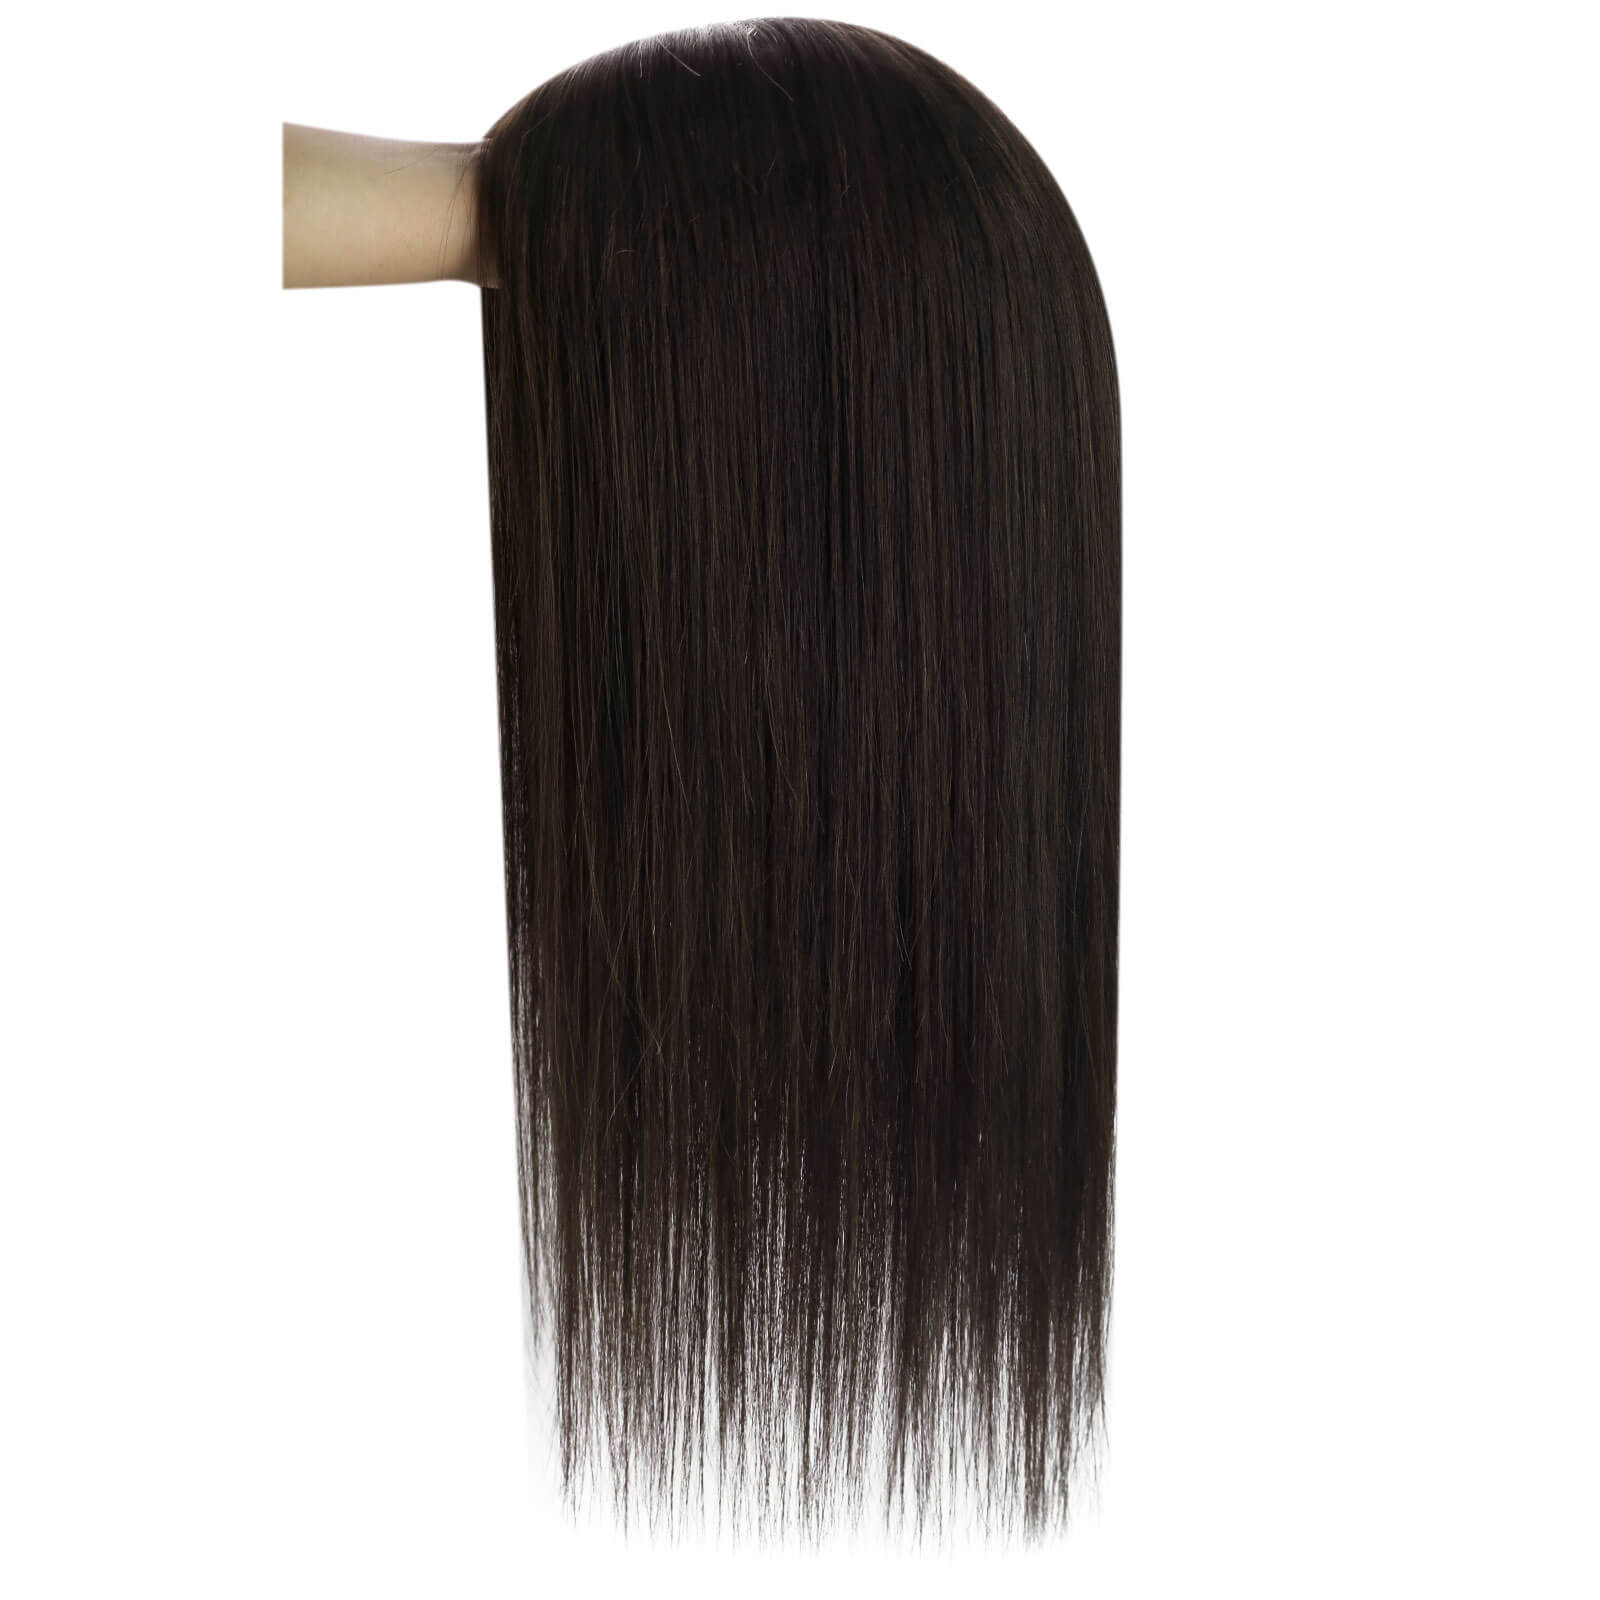 Hair Extensions Crown Human Hair without bangs for thin hair